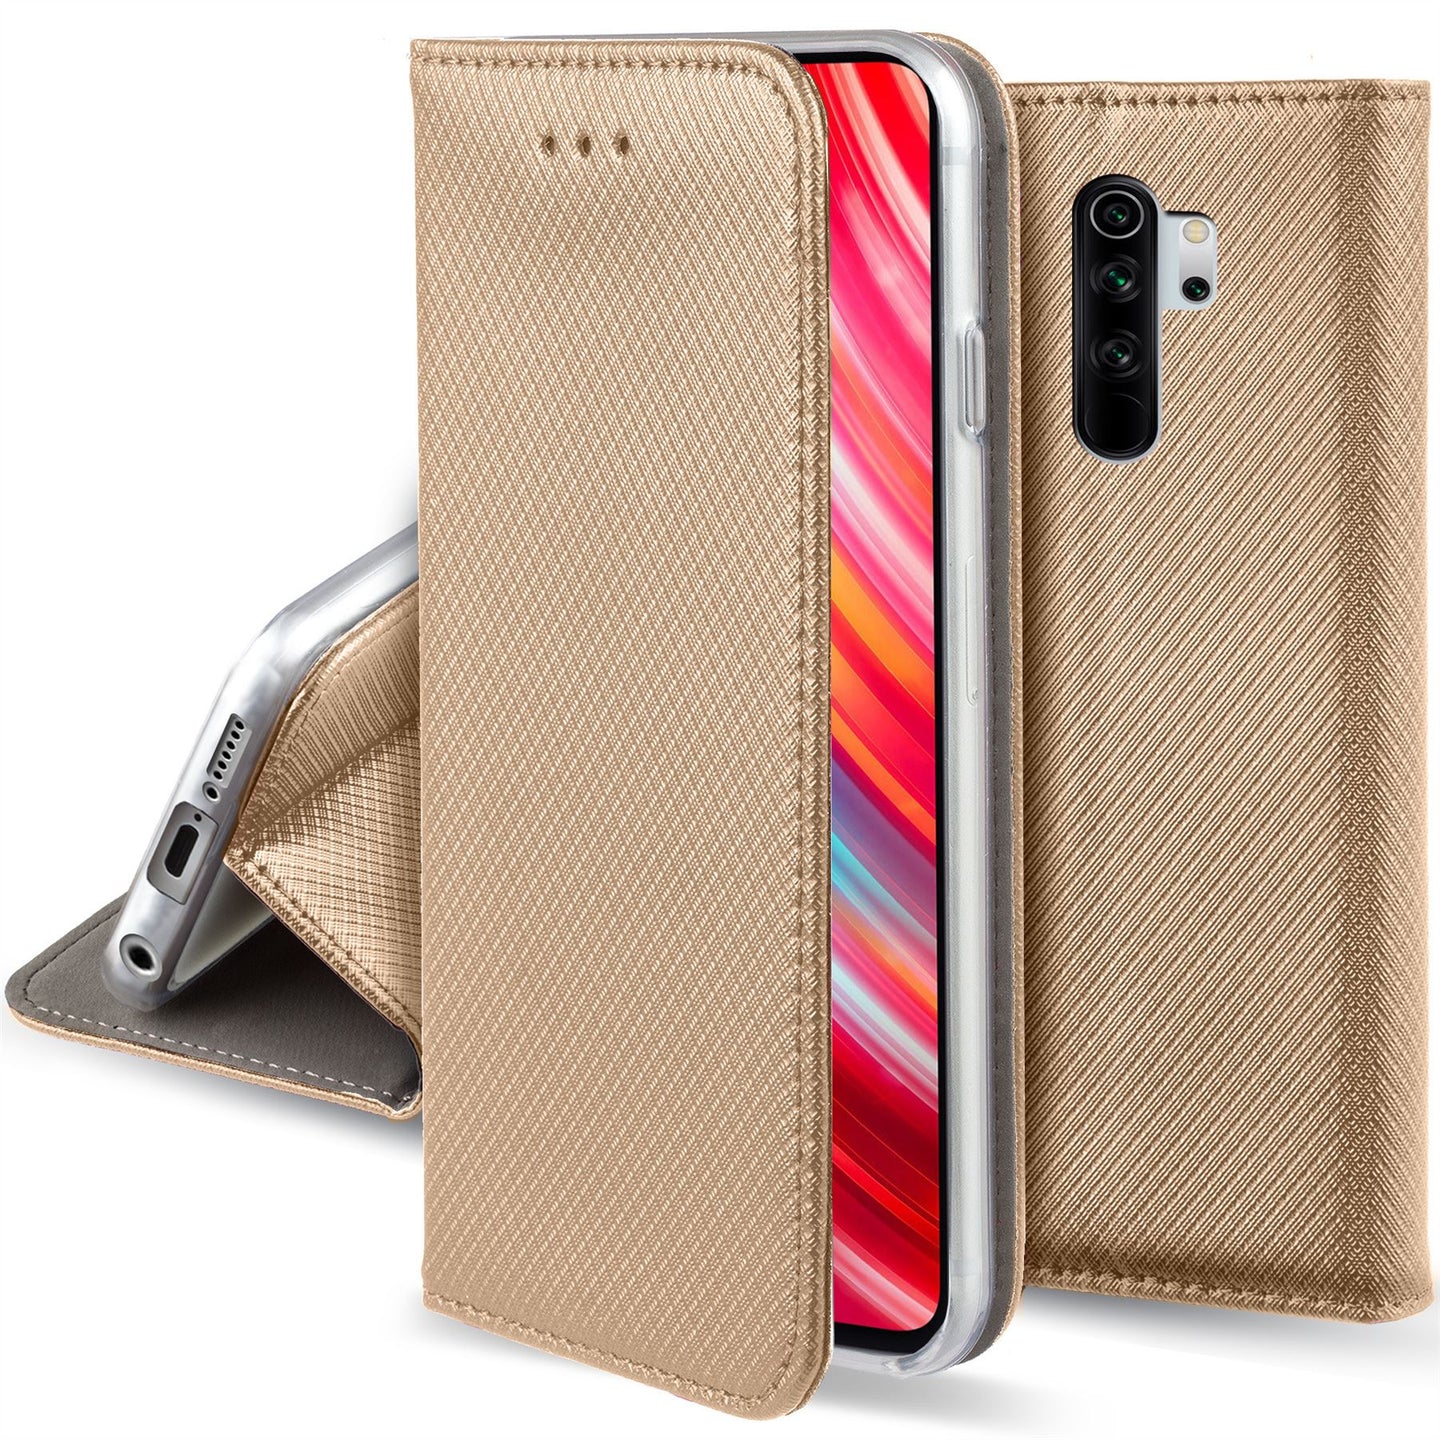 Moozy Case Flip Cover for Xiaomi Redmi Note 8 Pro, Gold - Smart Magnetic Flip Case with Card Holder and Stand